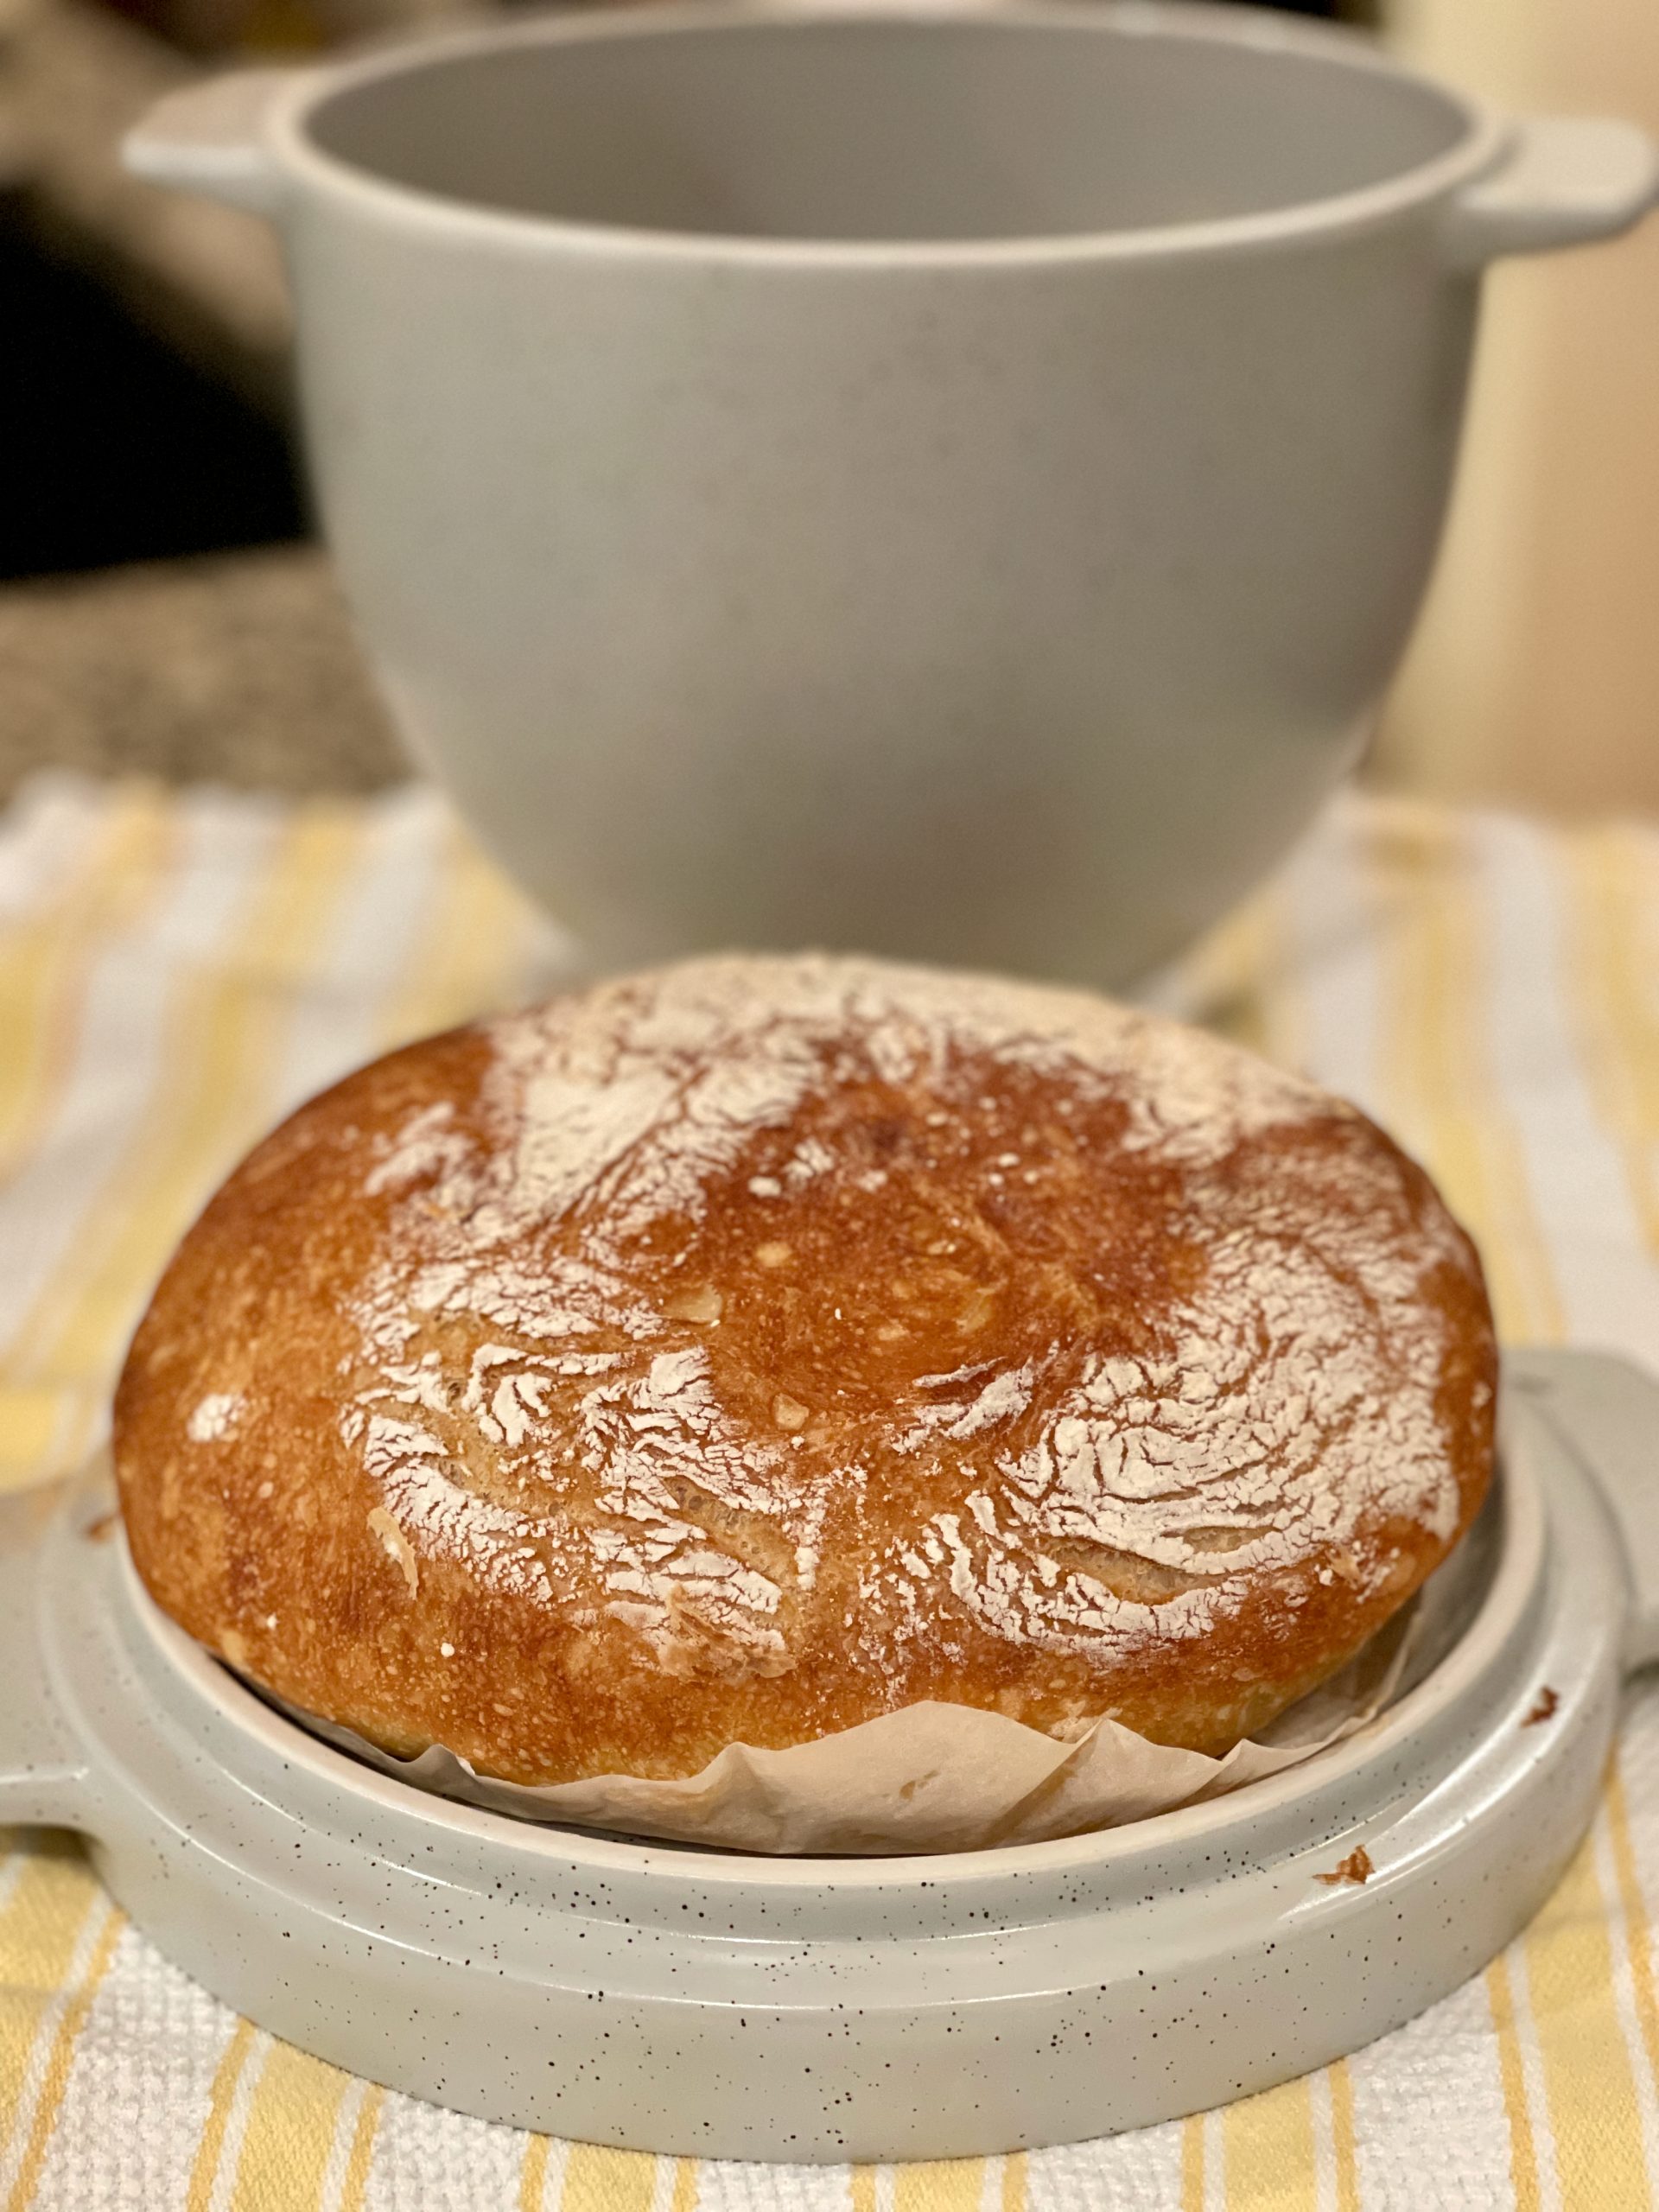 https://www.epicuricloud.com/wp-content/uploads/2021/12/KitchenAid-Bread-Bowl-The-Everyday-Artisan-Boule-Bread-scaled.jpeg